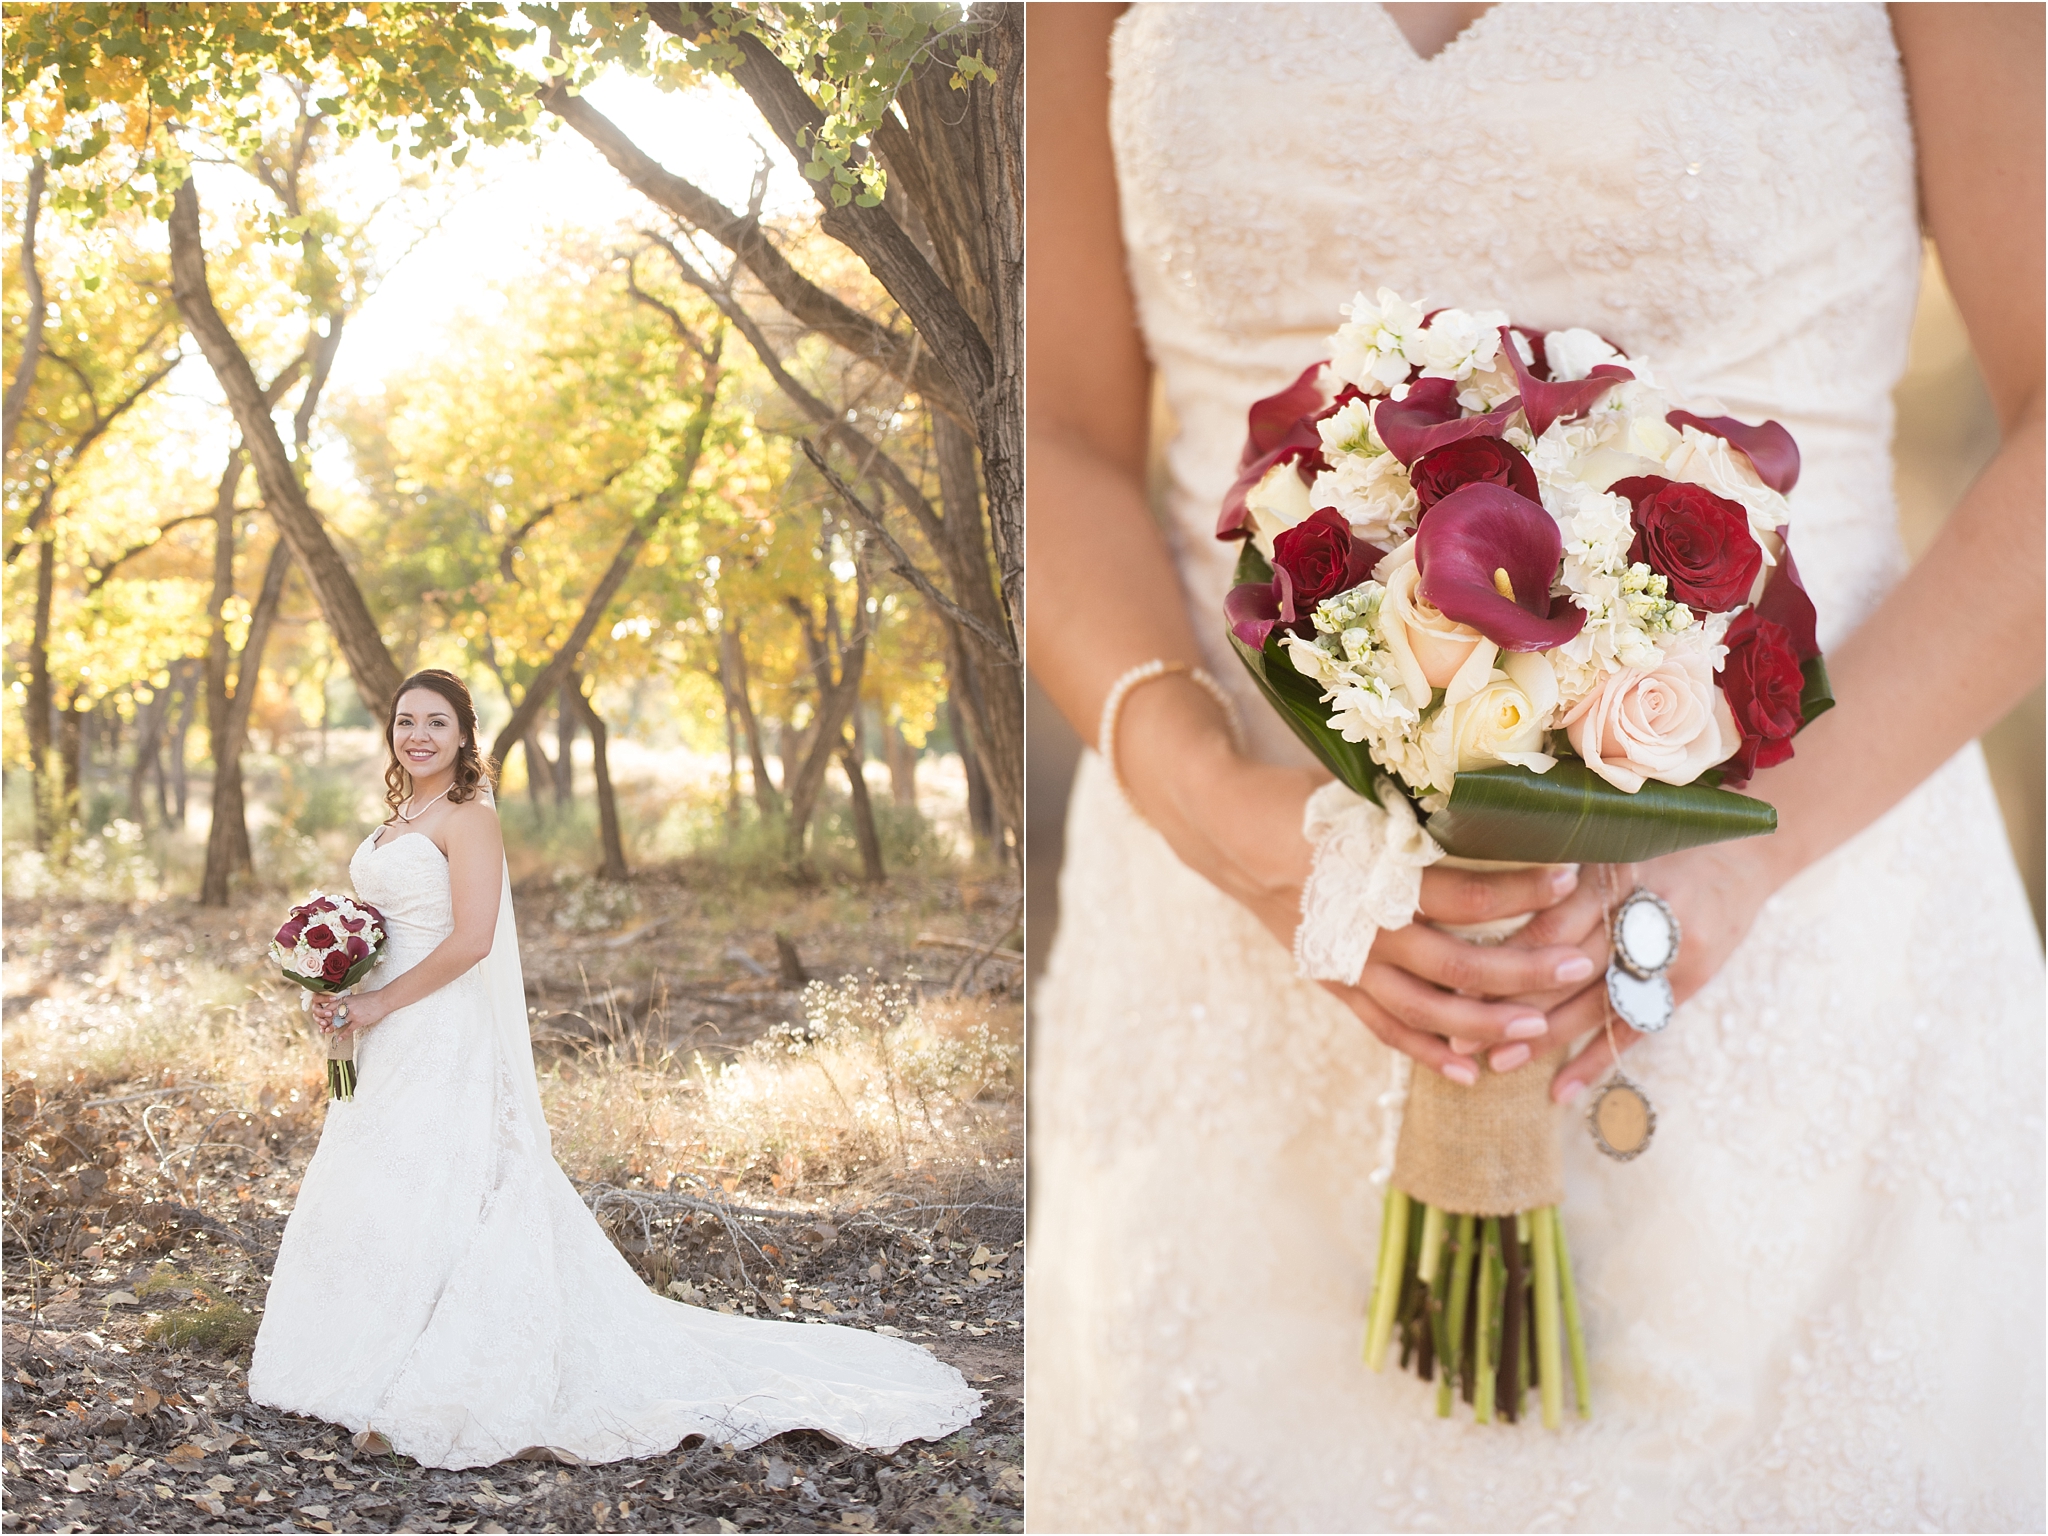 kayla kitts photography - albuquerque wedding photographer - hairpins and scissors - a cake odyssey - new mexico wedding photographer_0054.jpg